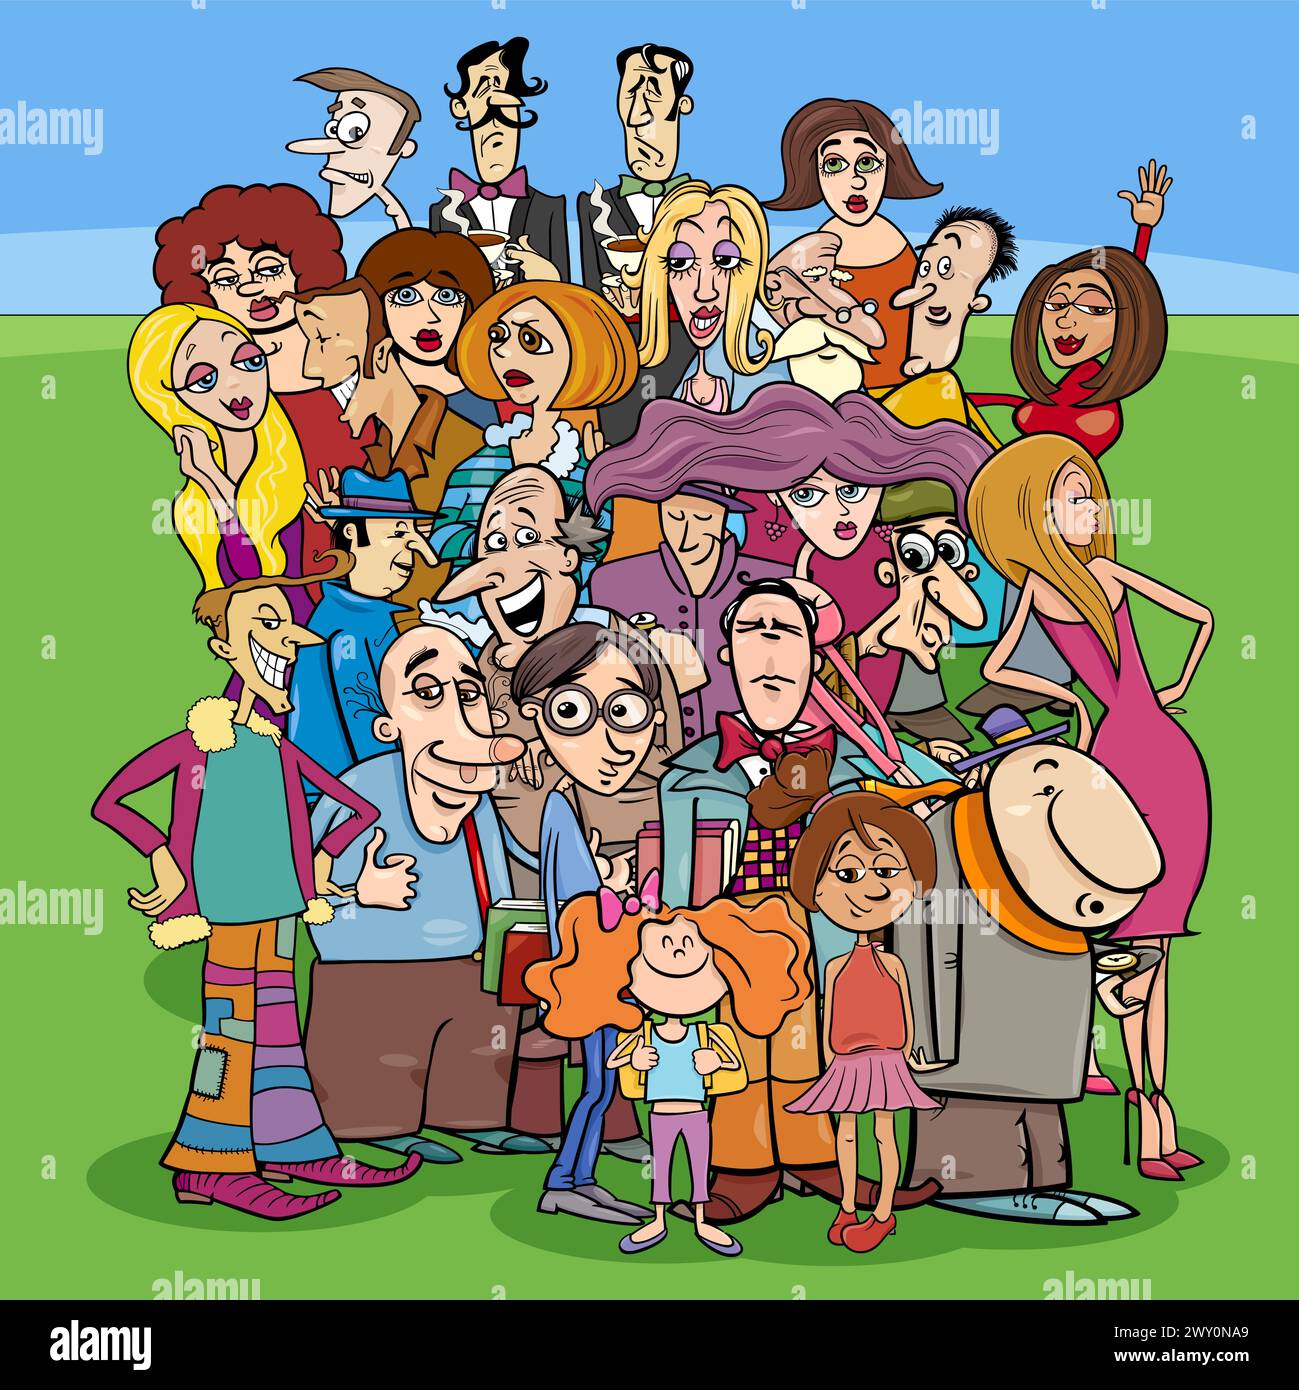 Cartoon illustration of many people characters in the crowd Stock Vector